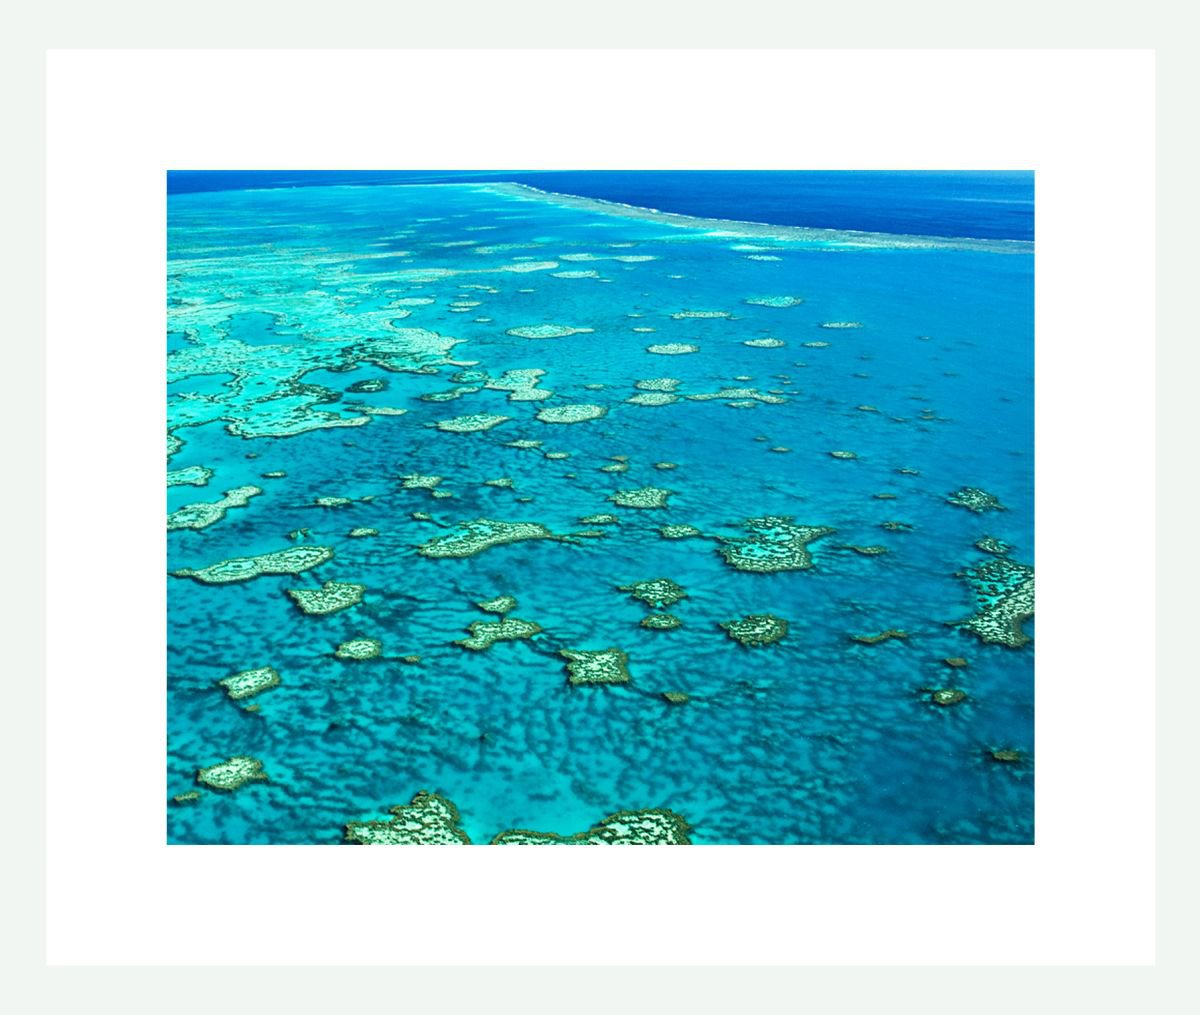 Natural Abstracts - The Great Barrier Reef number 2 by Ken Skehan